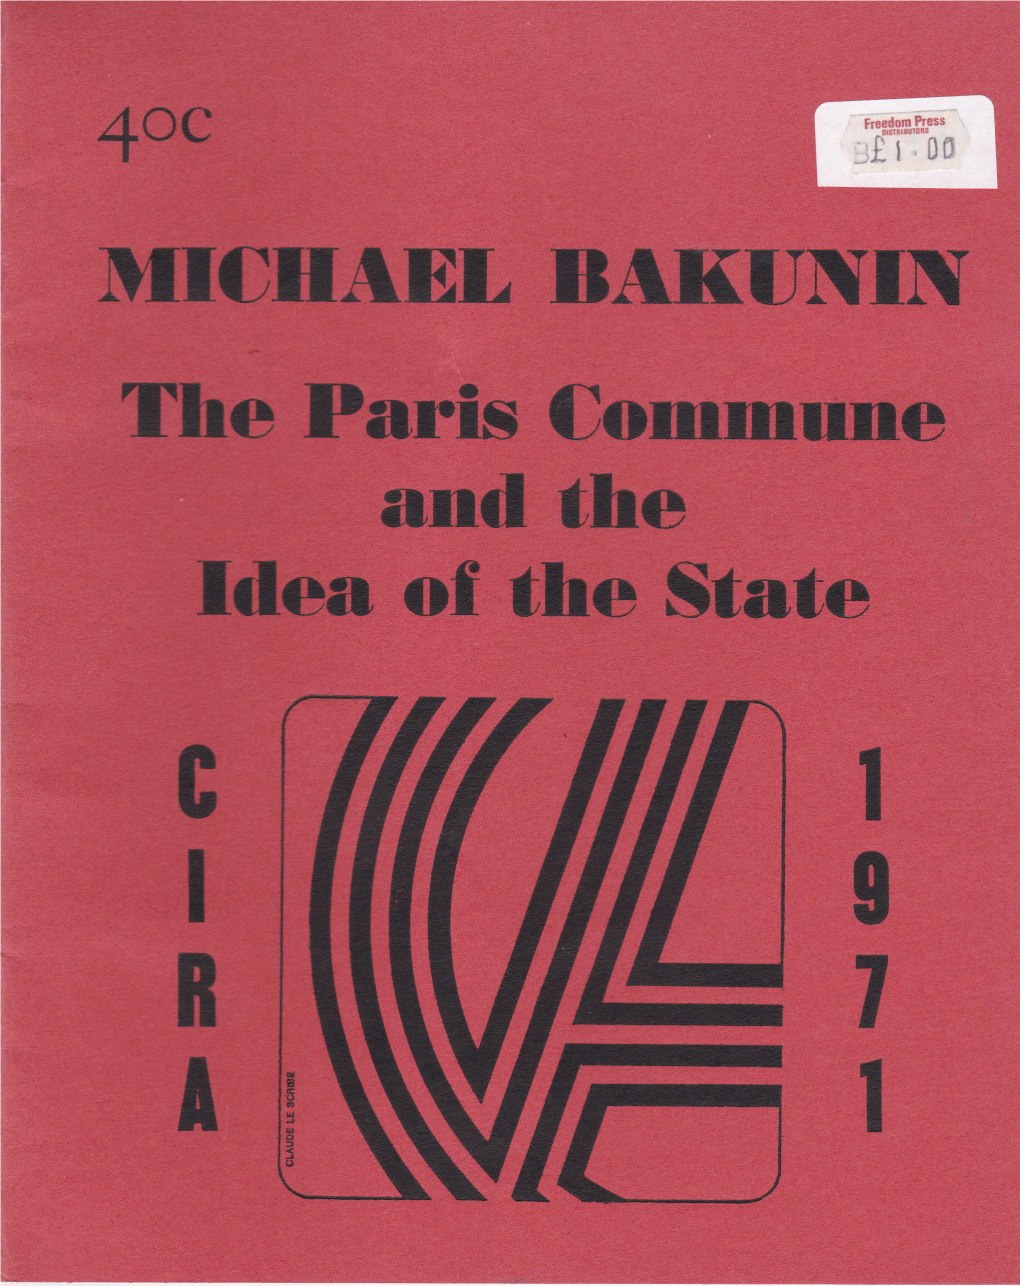 This Edition of Bakunin's the Paris Commune and the Idea of the State